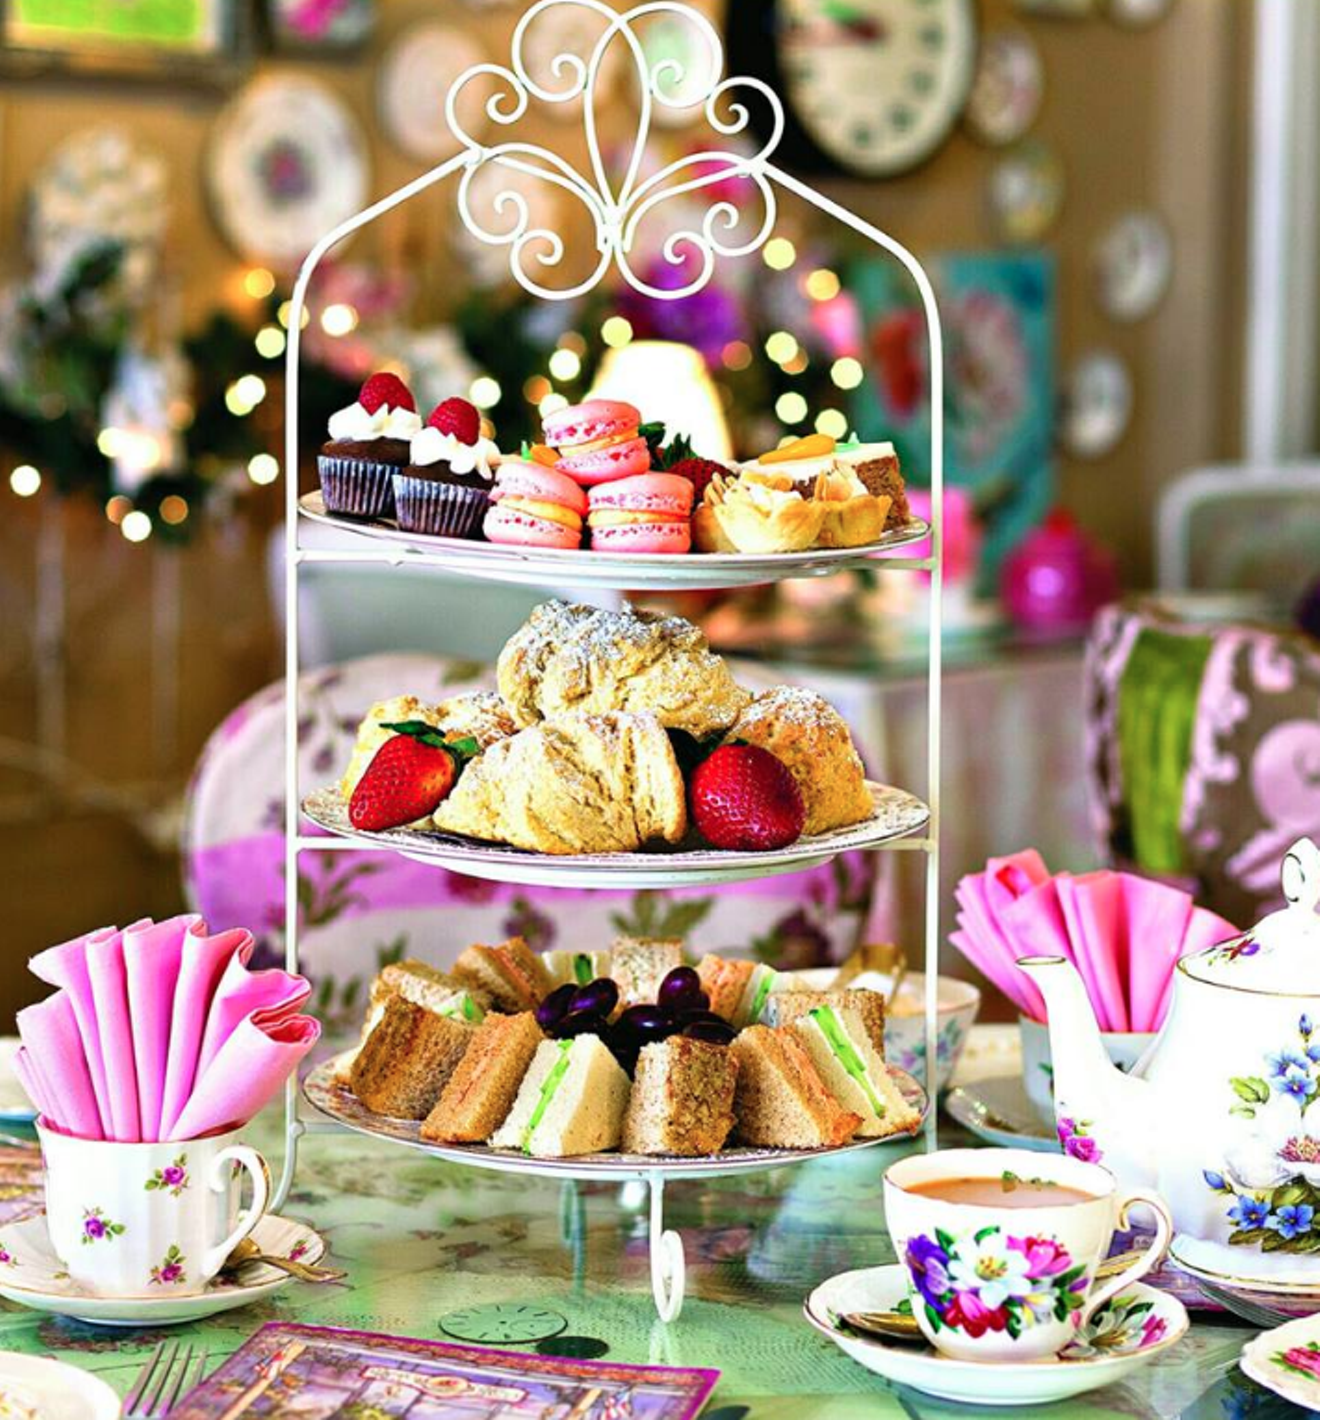 Three tiers of delicious treats at the English Rose Tea Room.